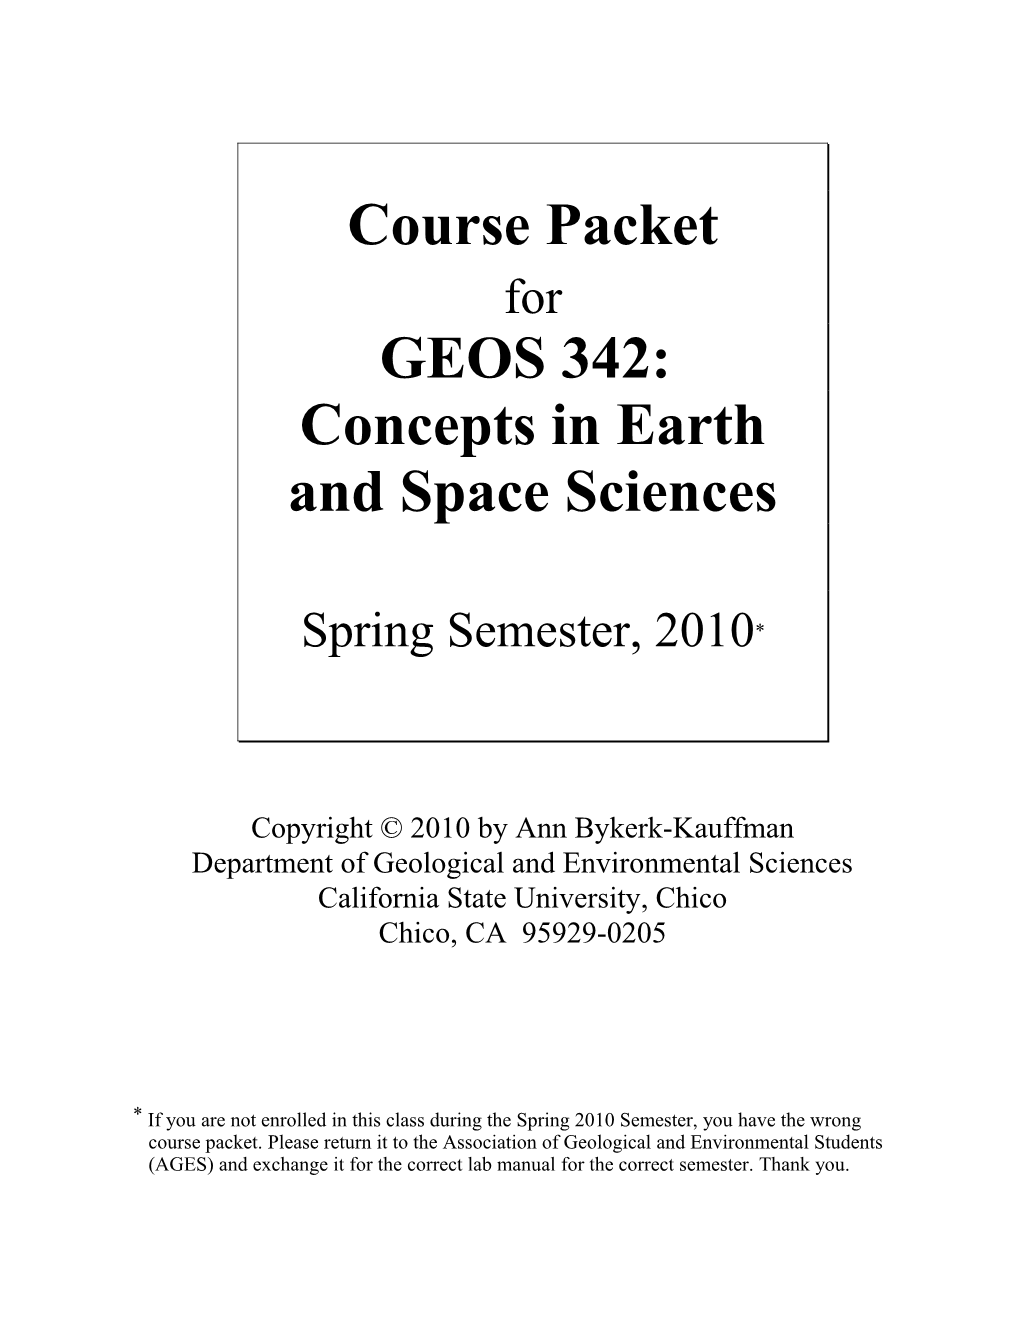 Concepts in Earth and Space Sciences